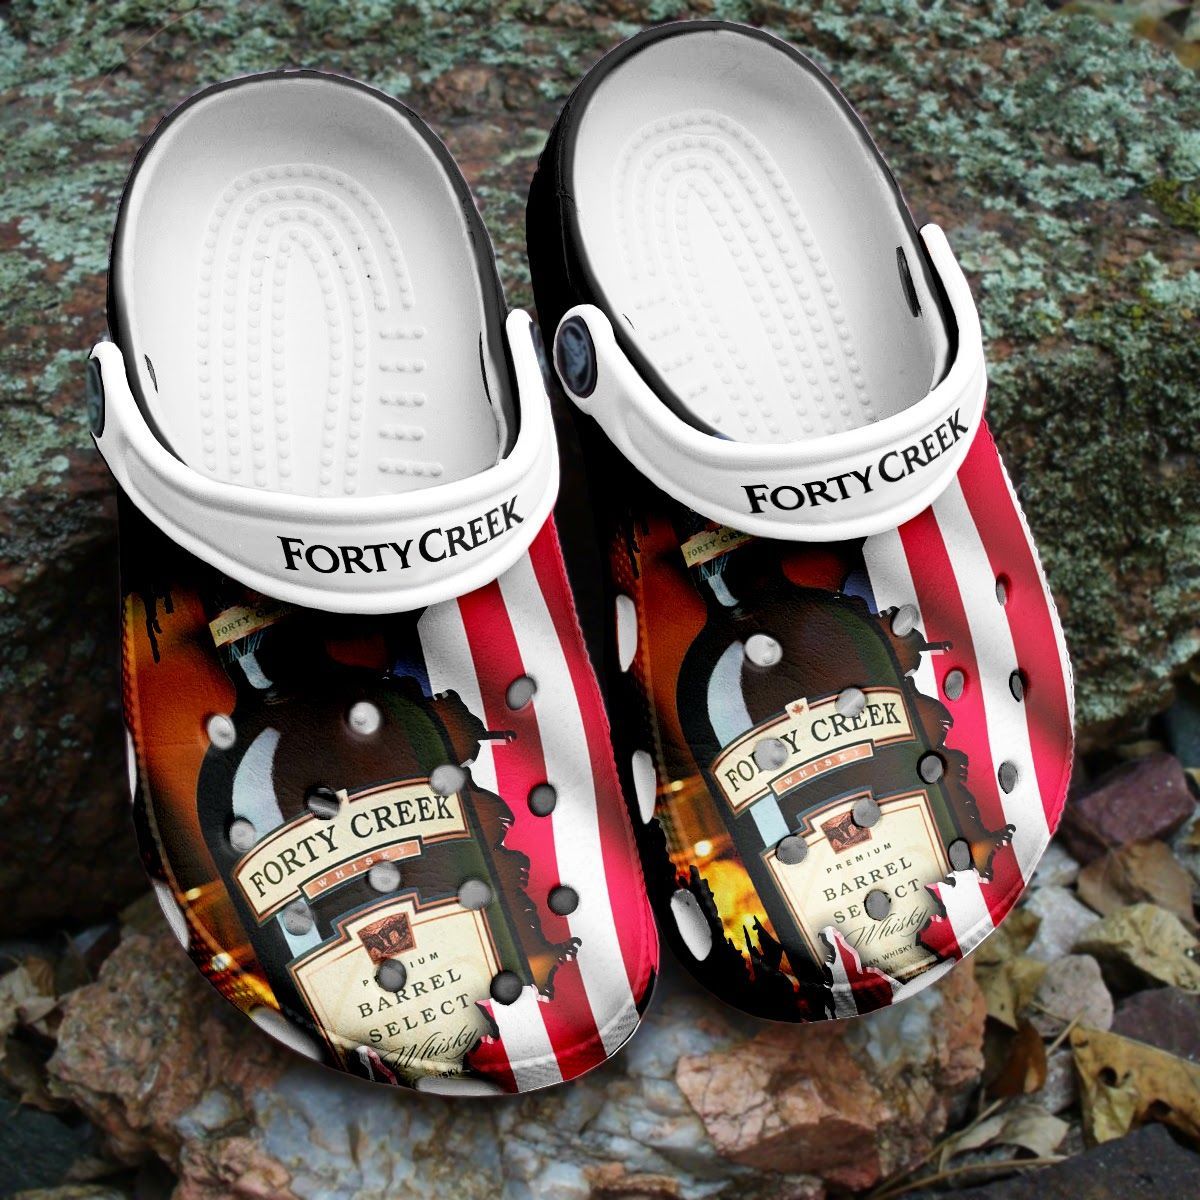 If you'd like to purchase a pair of Crocband Clogs, be sure to check out the official website. 95